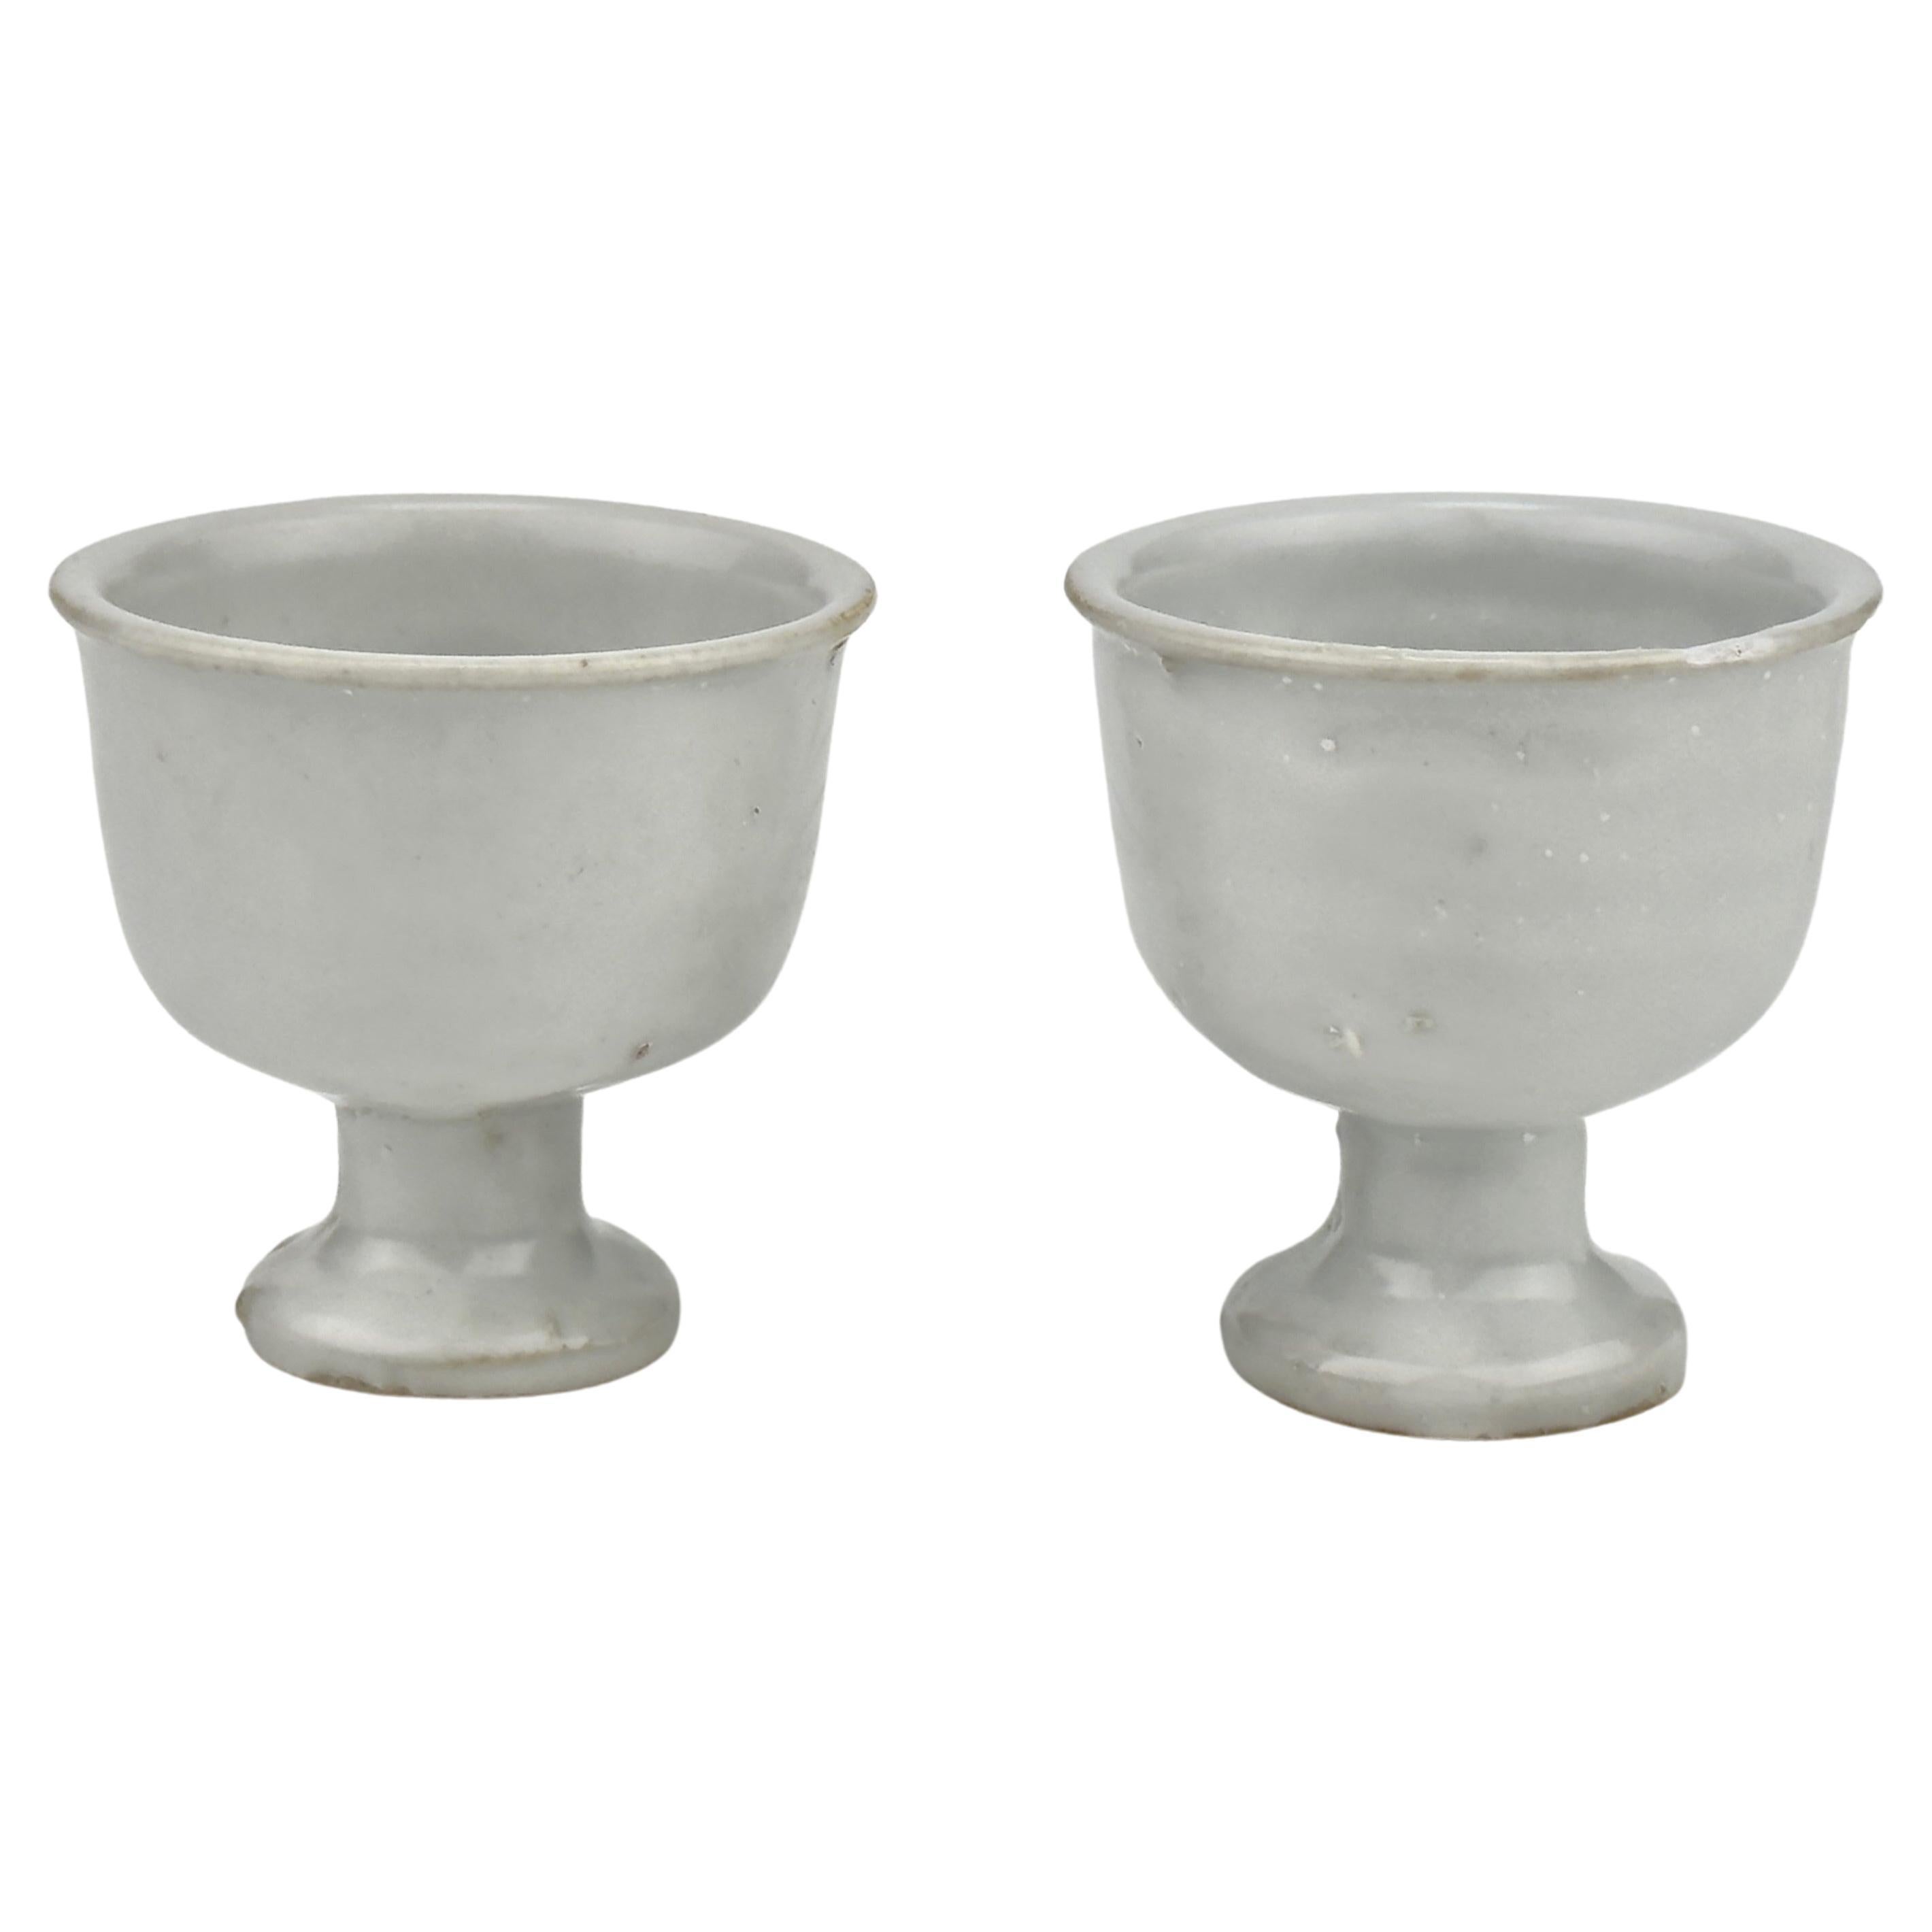 Pair of Small White porcelain Cup, Late Ming Era(16-17th Century)